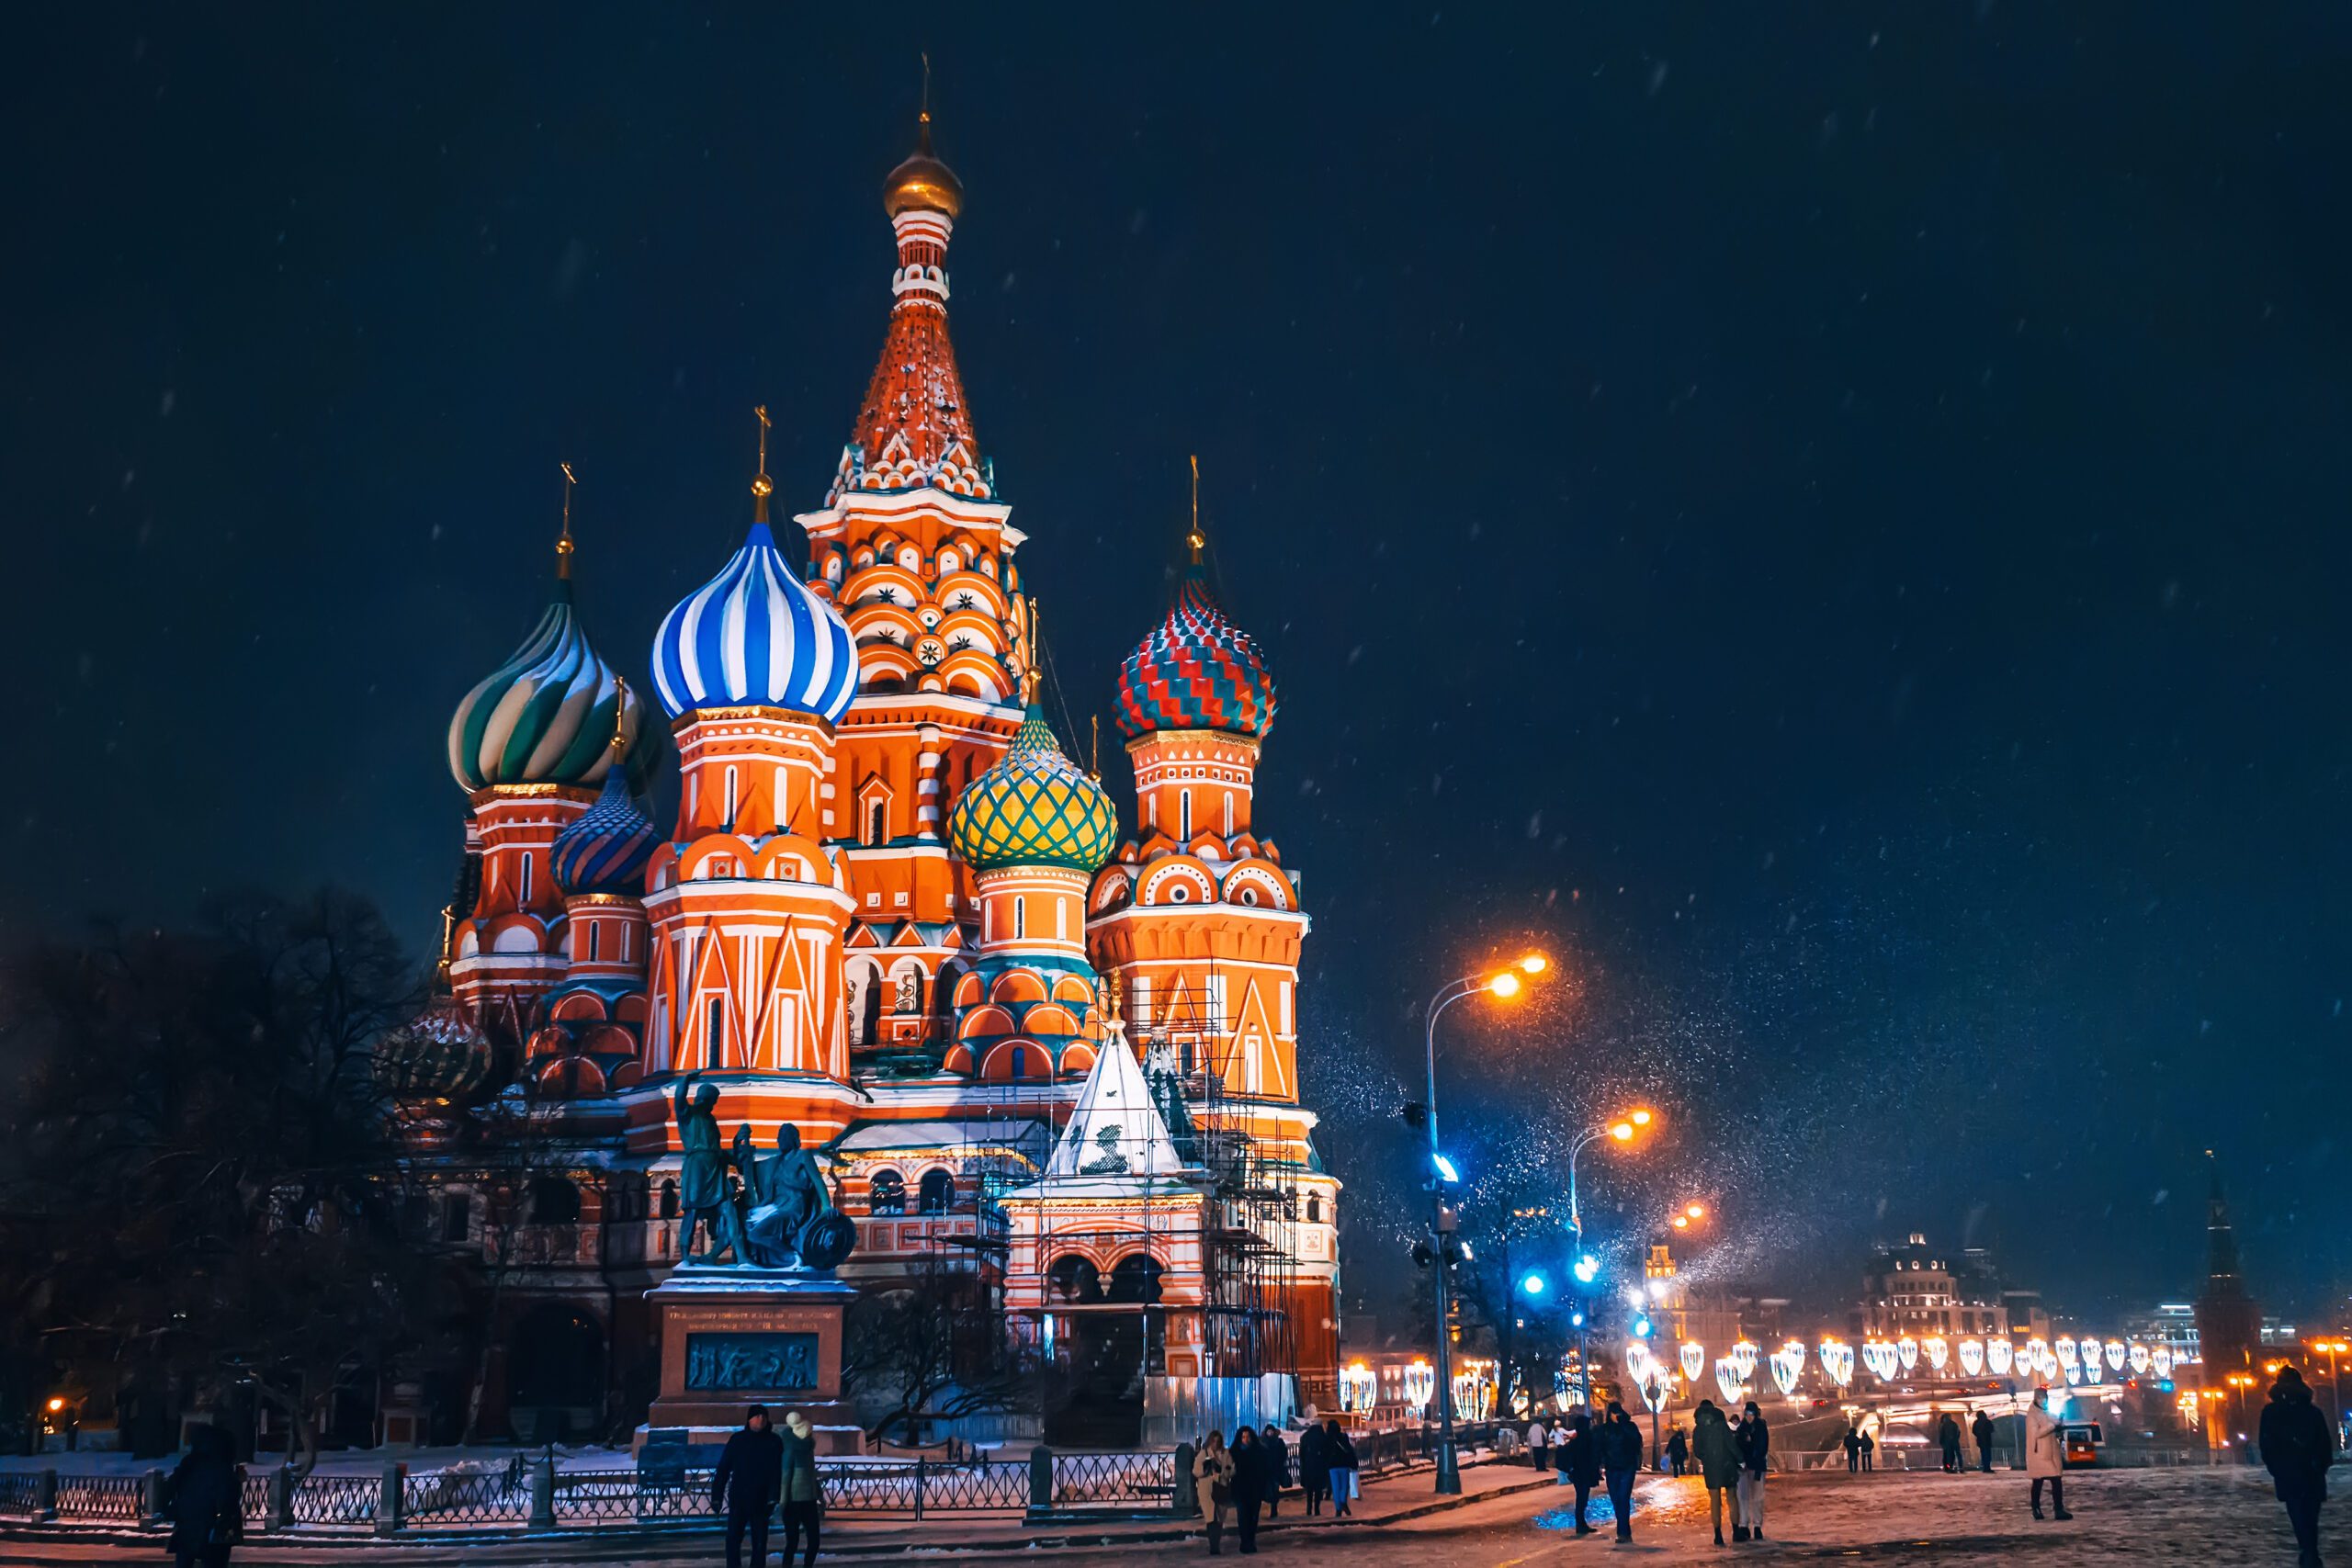 Saint Basil’s Cathedral on red Square in Moscow in Russia at night in winter